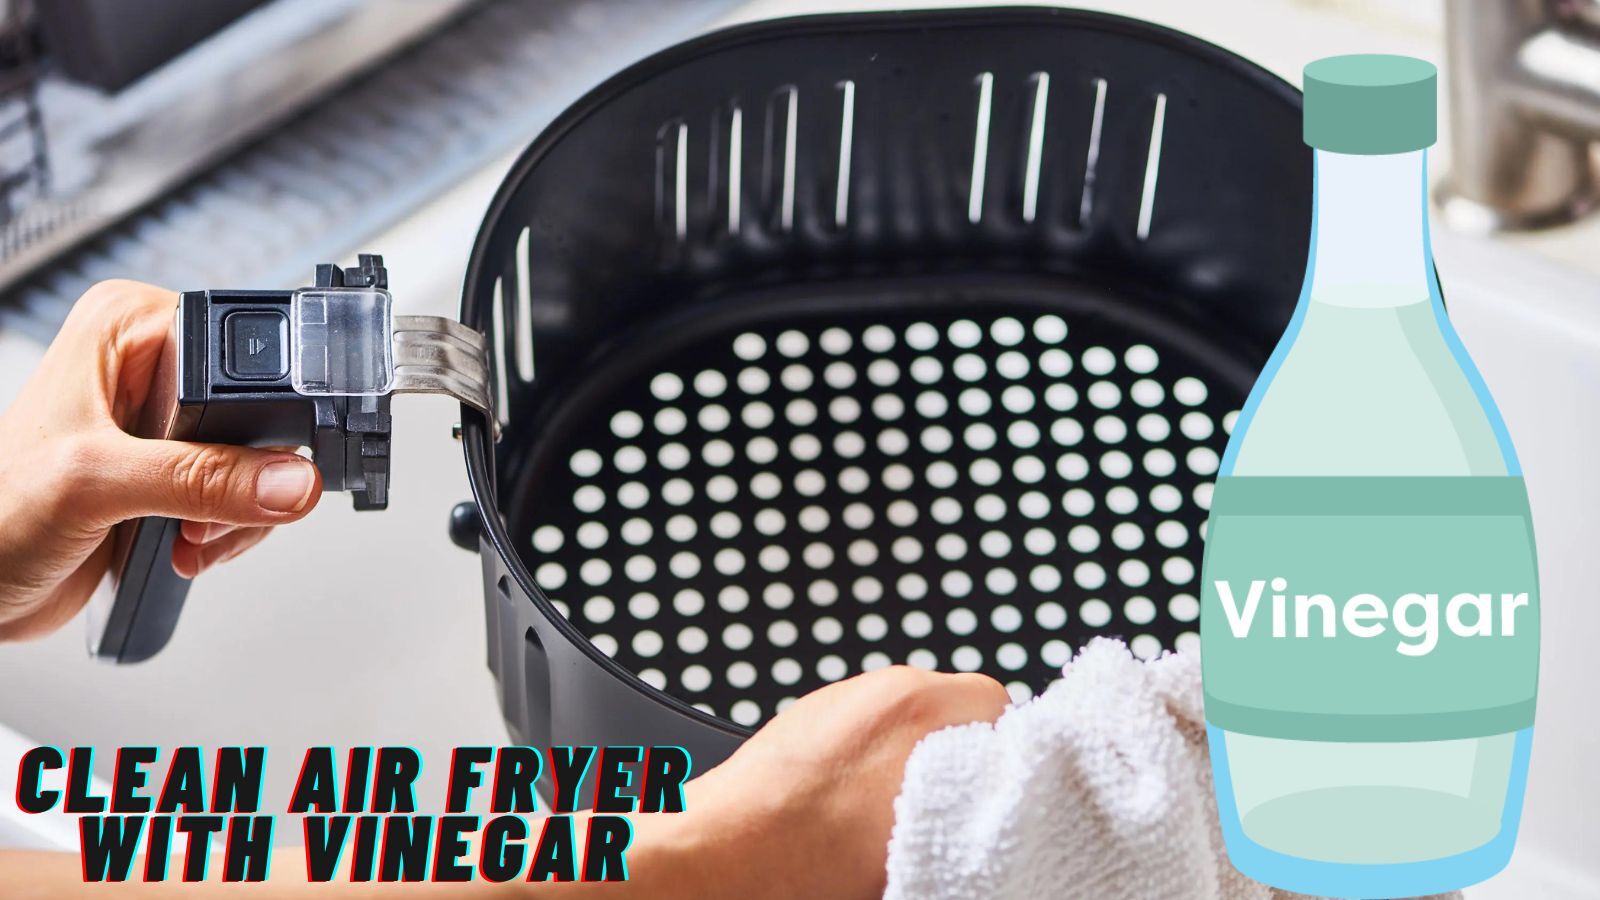 How to Clean Air Fryer with Vinegar [Get Grease Off]